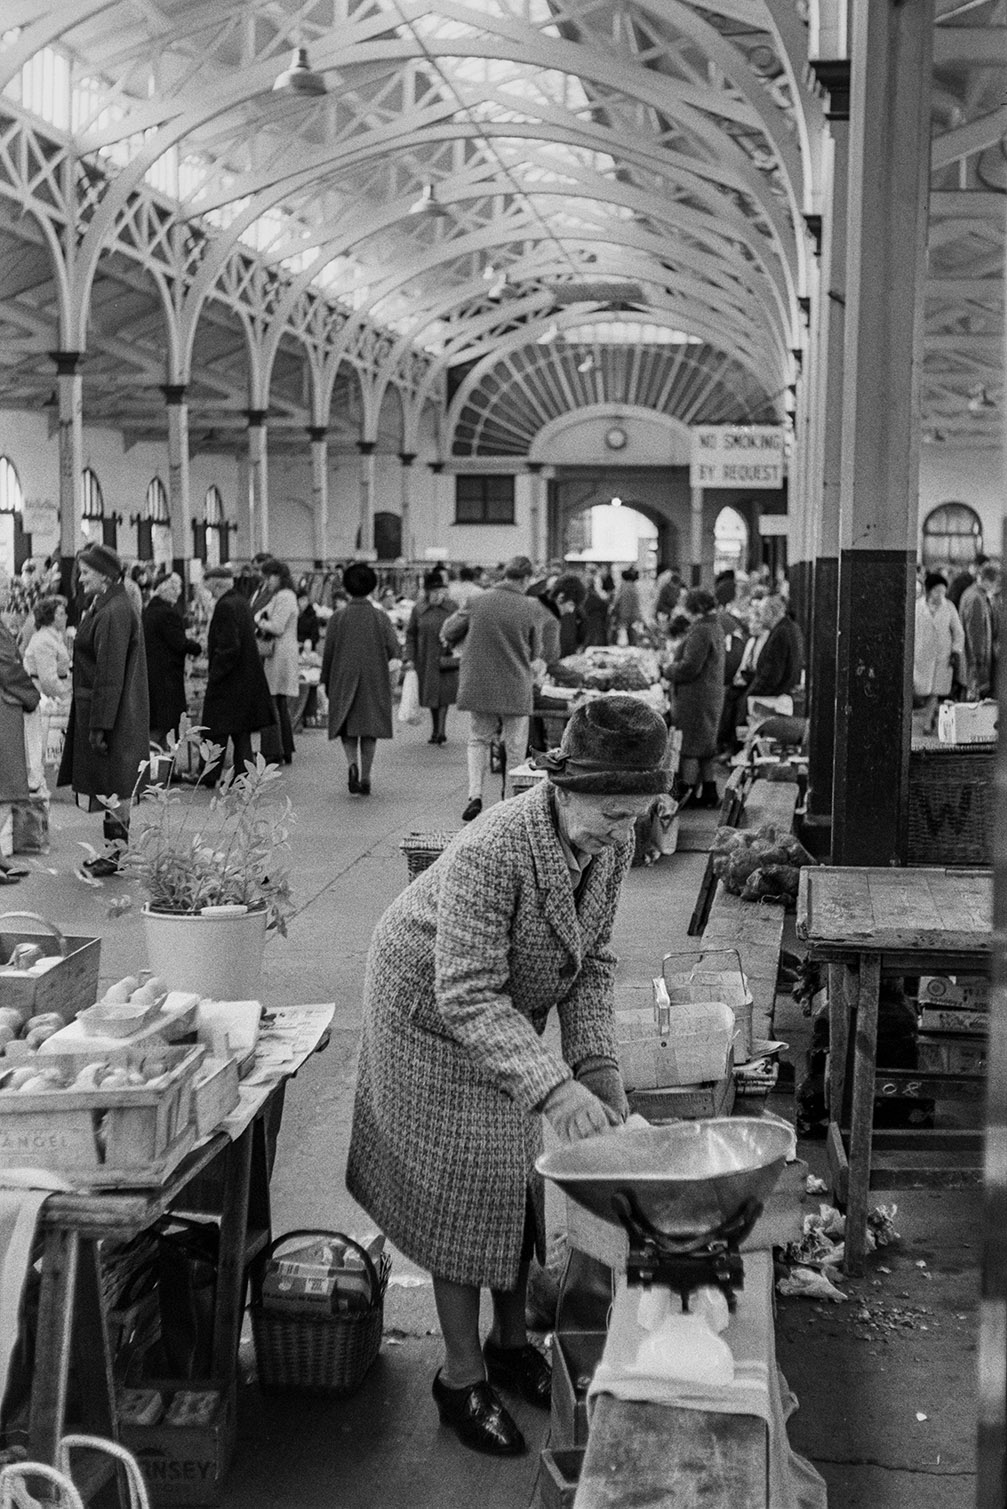 A woman setting out items for sale on a stall at Barnstaple Pannier Market. A set of scales is next to her and eggs and foliage can be seen on the stall. Other stallholder and shoppers can be seen in the background.